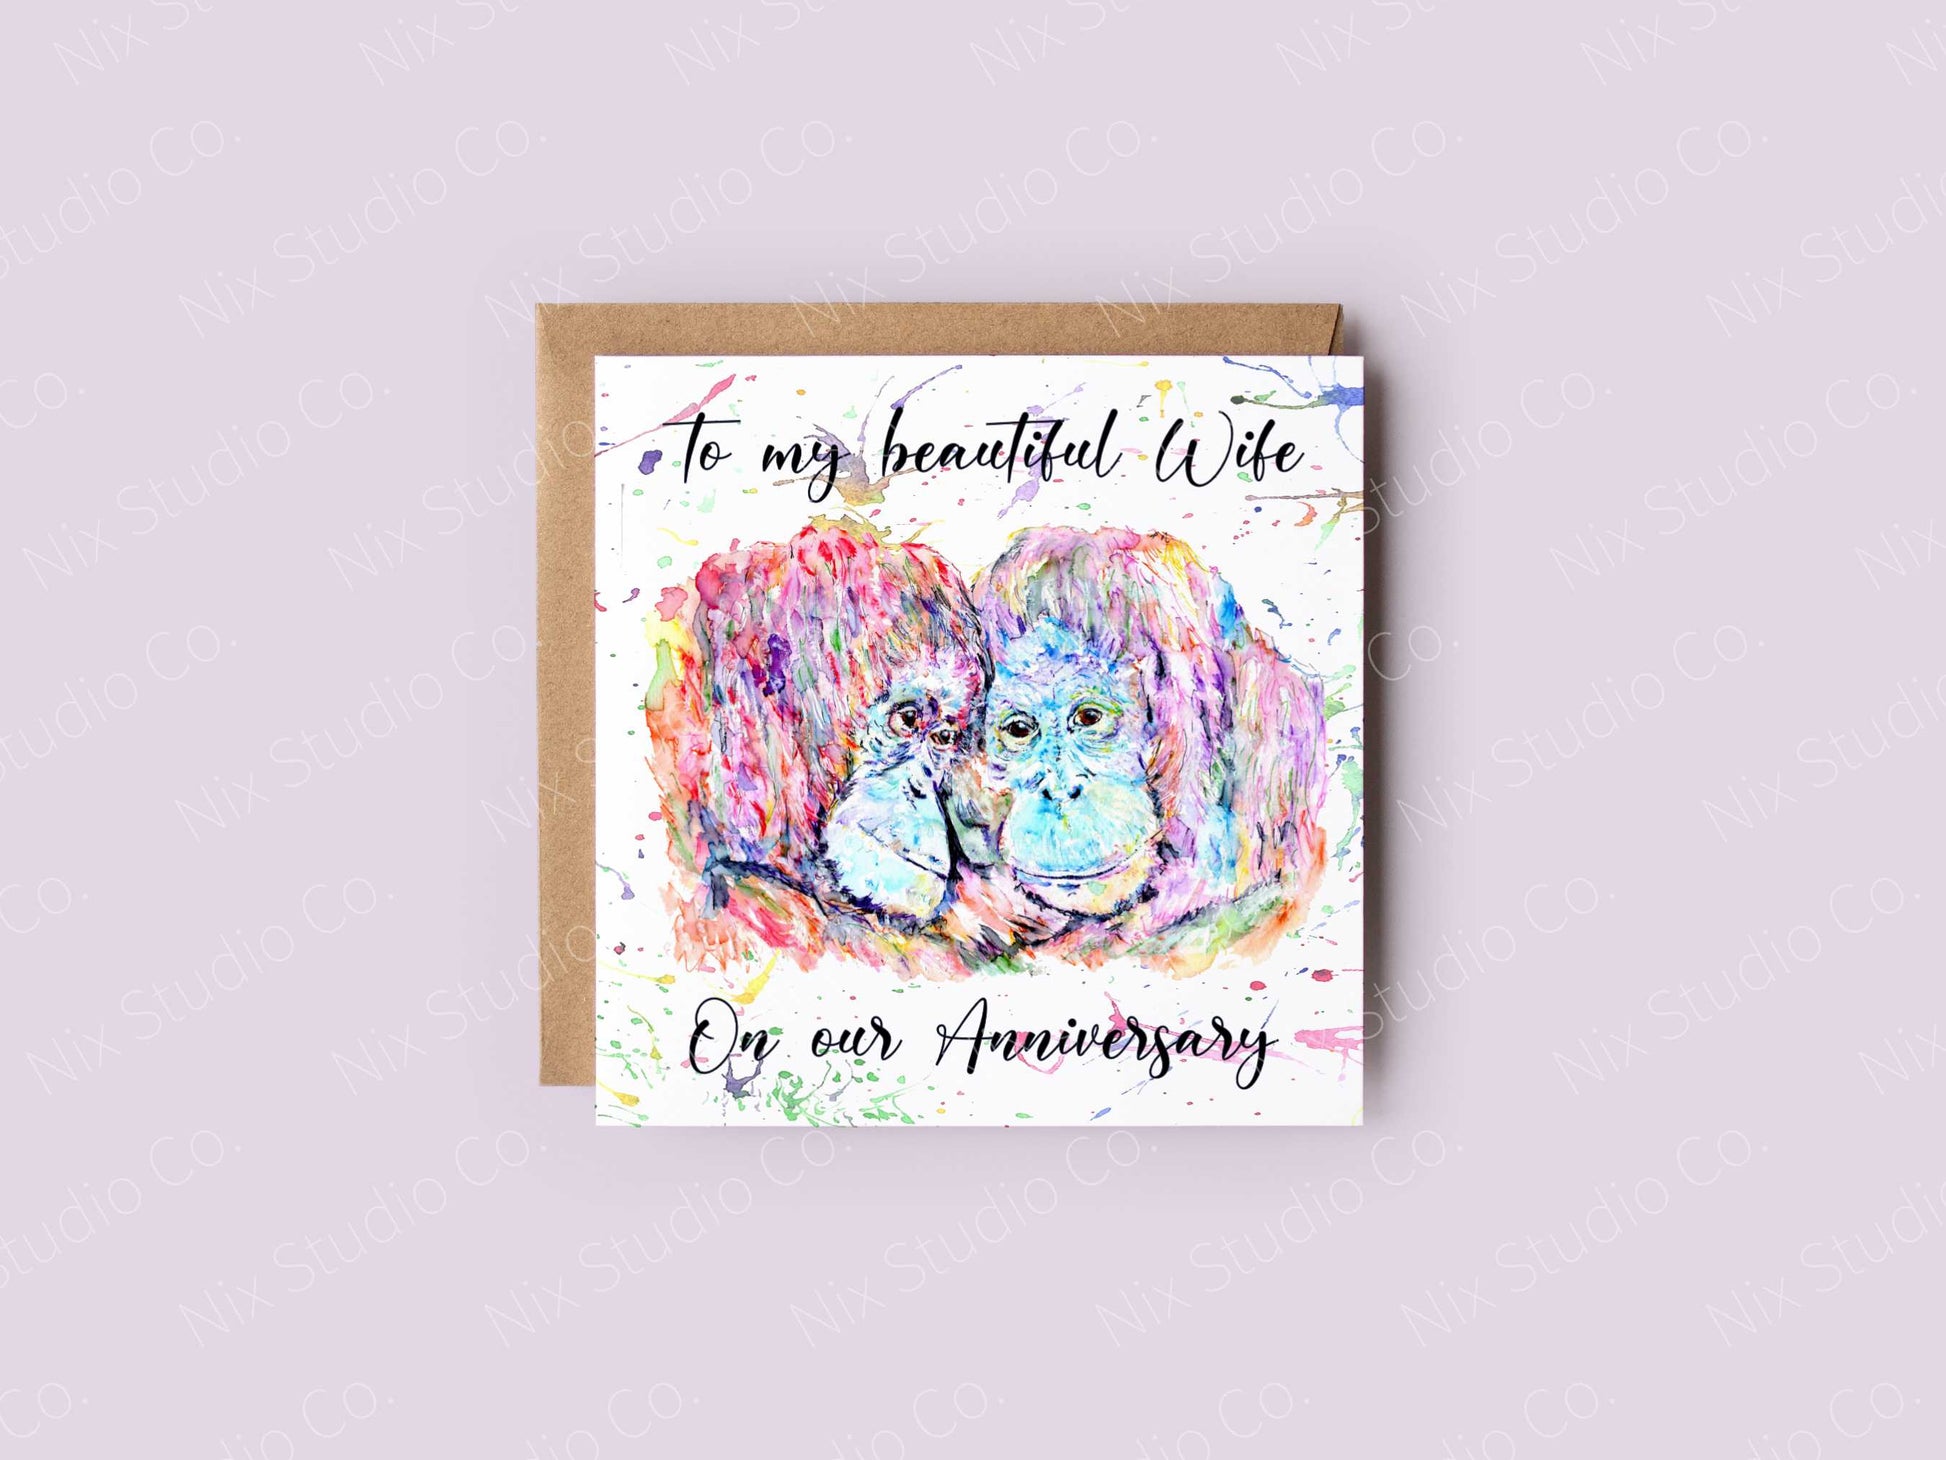 anniversary card with the text to my beautiful wife on out anniversary printed above colourful watercolour style image of two apes